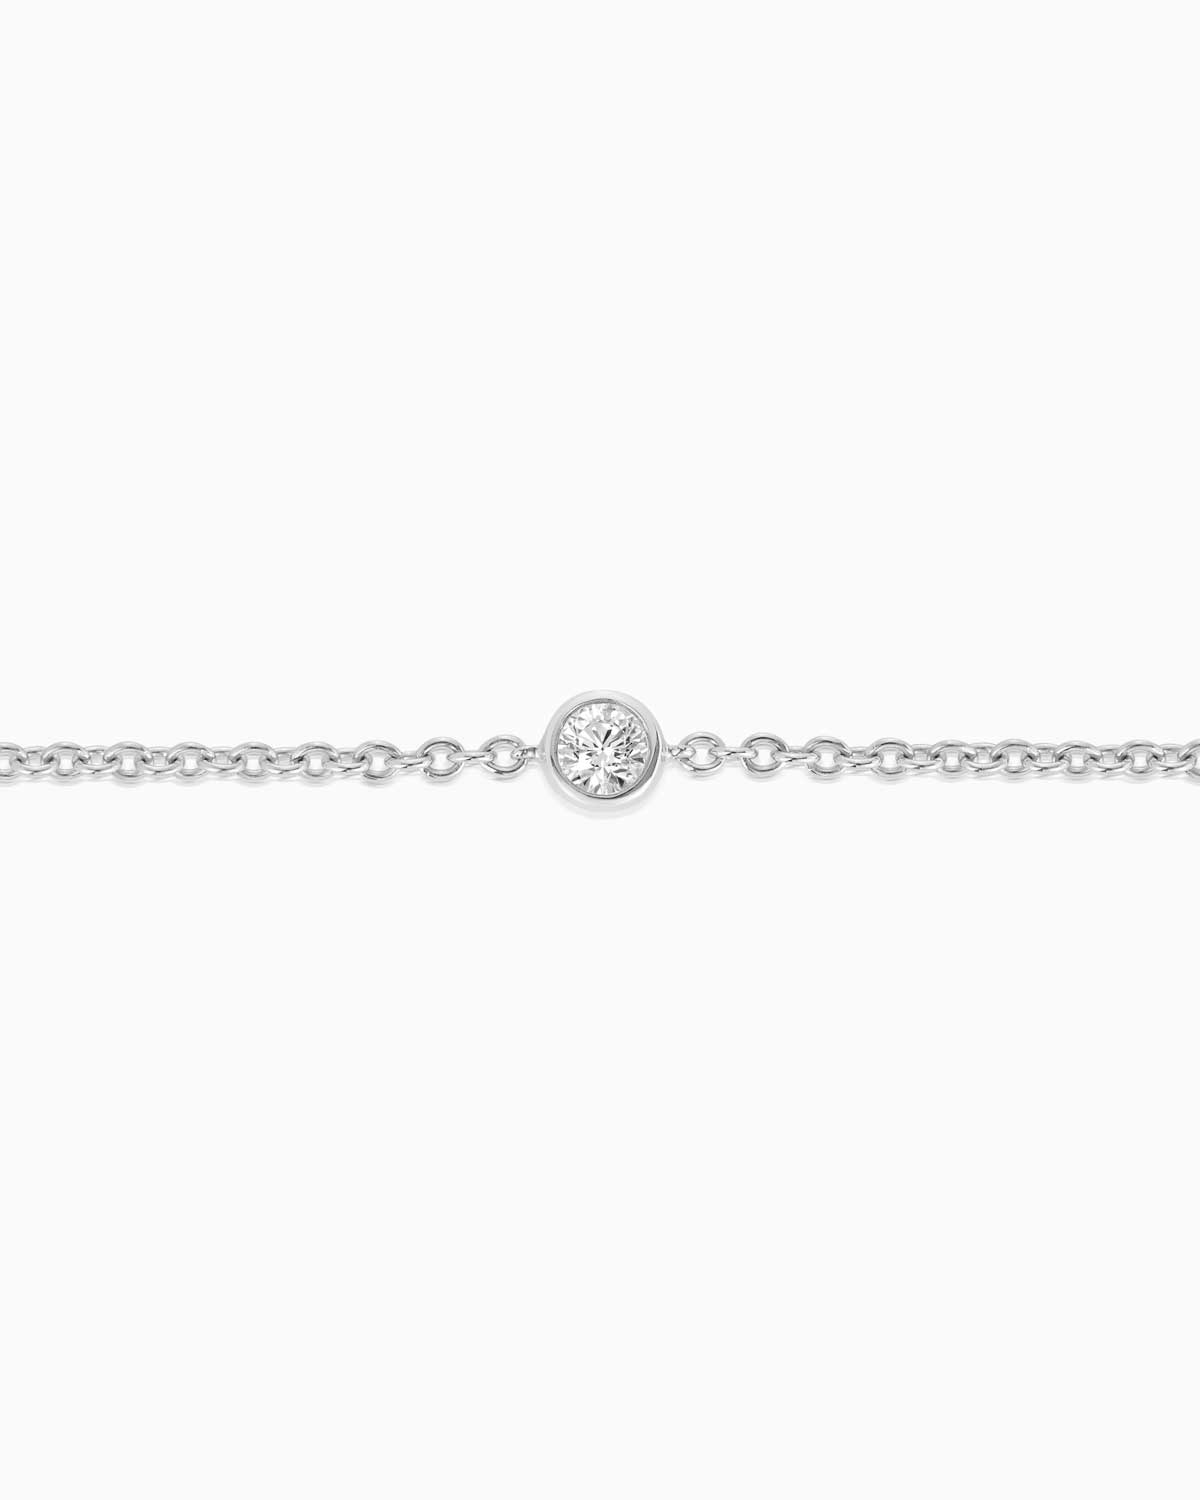 Close up view of Petit single stone diamond bracelet featuring 18 karat white gold by claude and me jewellery.